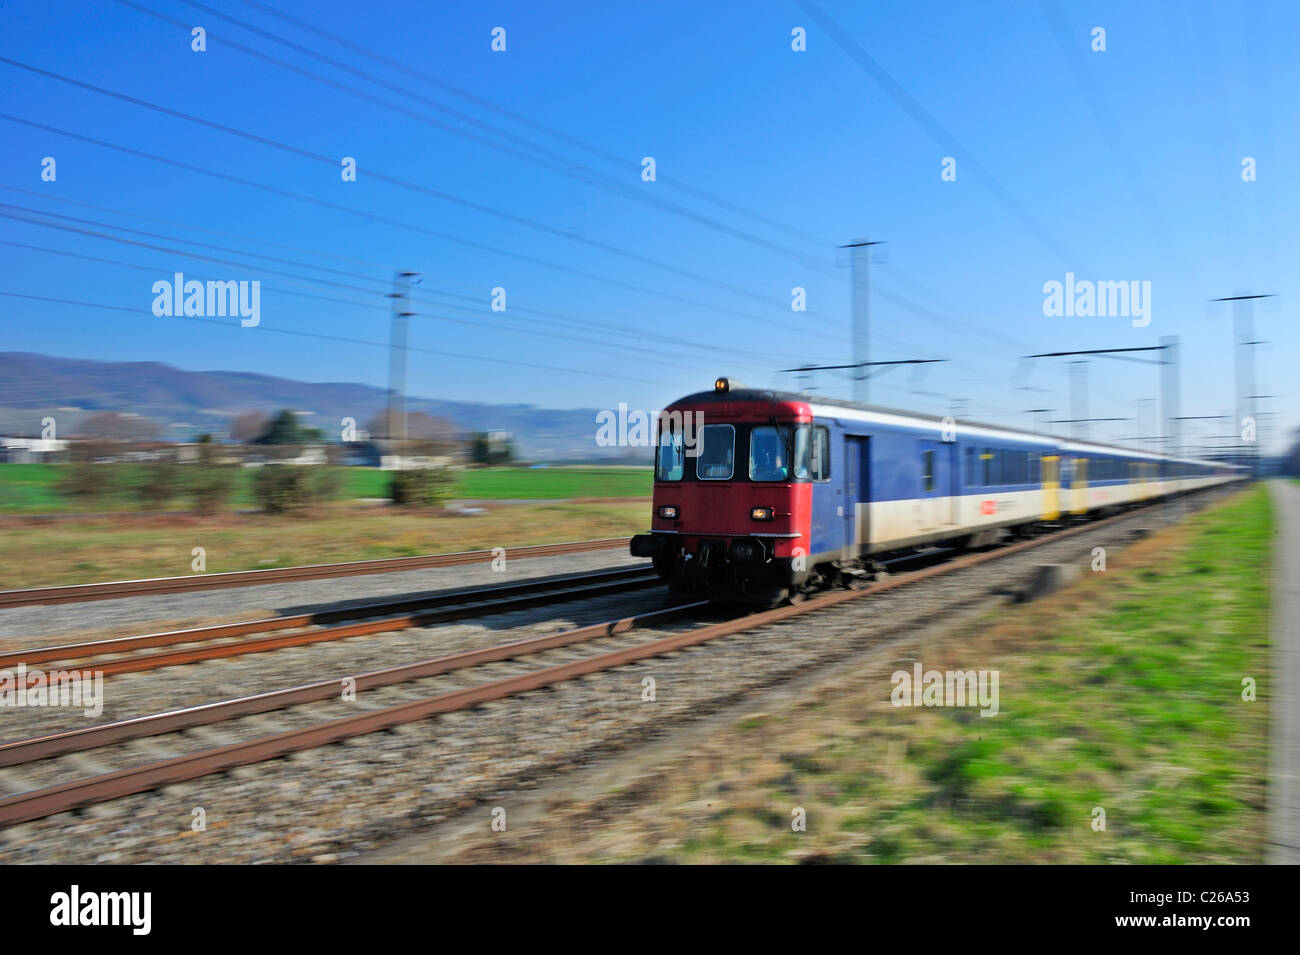 A Swiss suburban train. Motion blur used to give sense of speed. Stock Photo